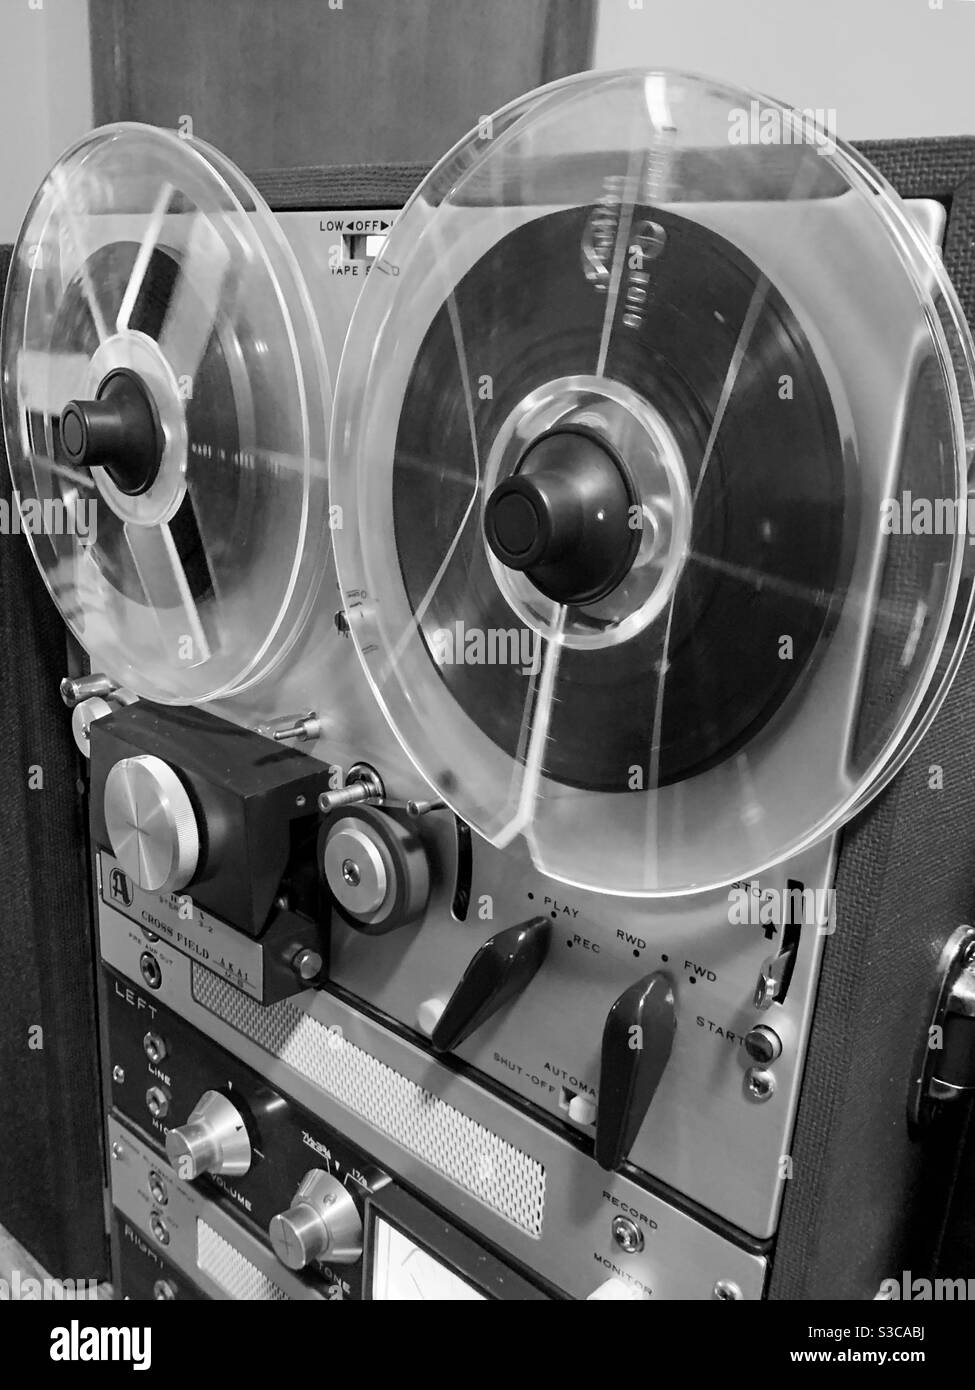 Teac A-3440 Reel-to-reel front view Stock Photo - Alamy